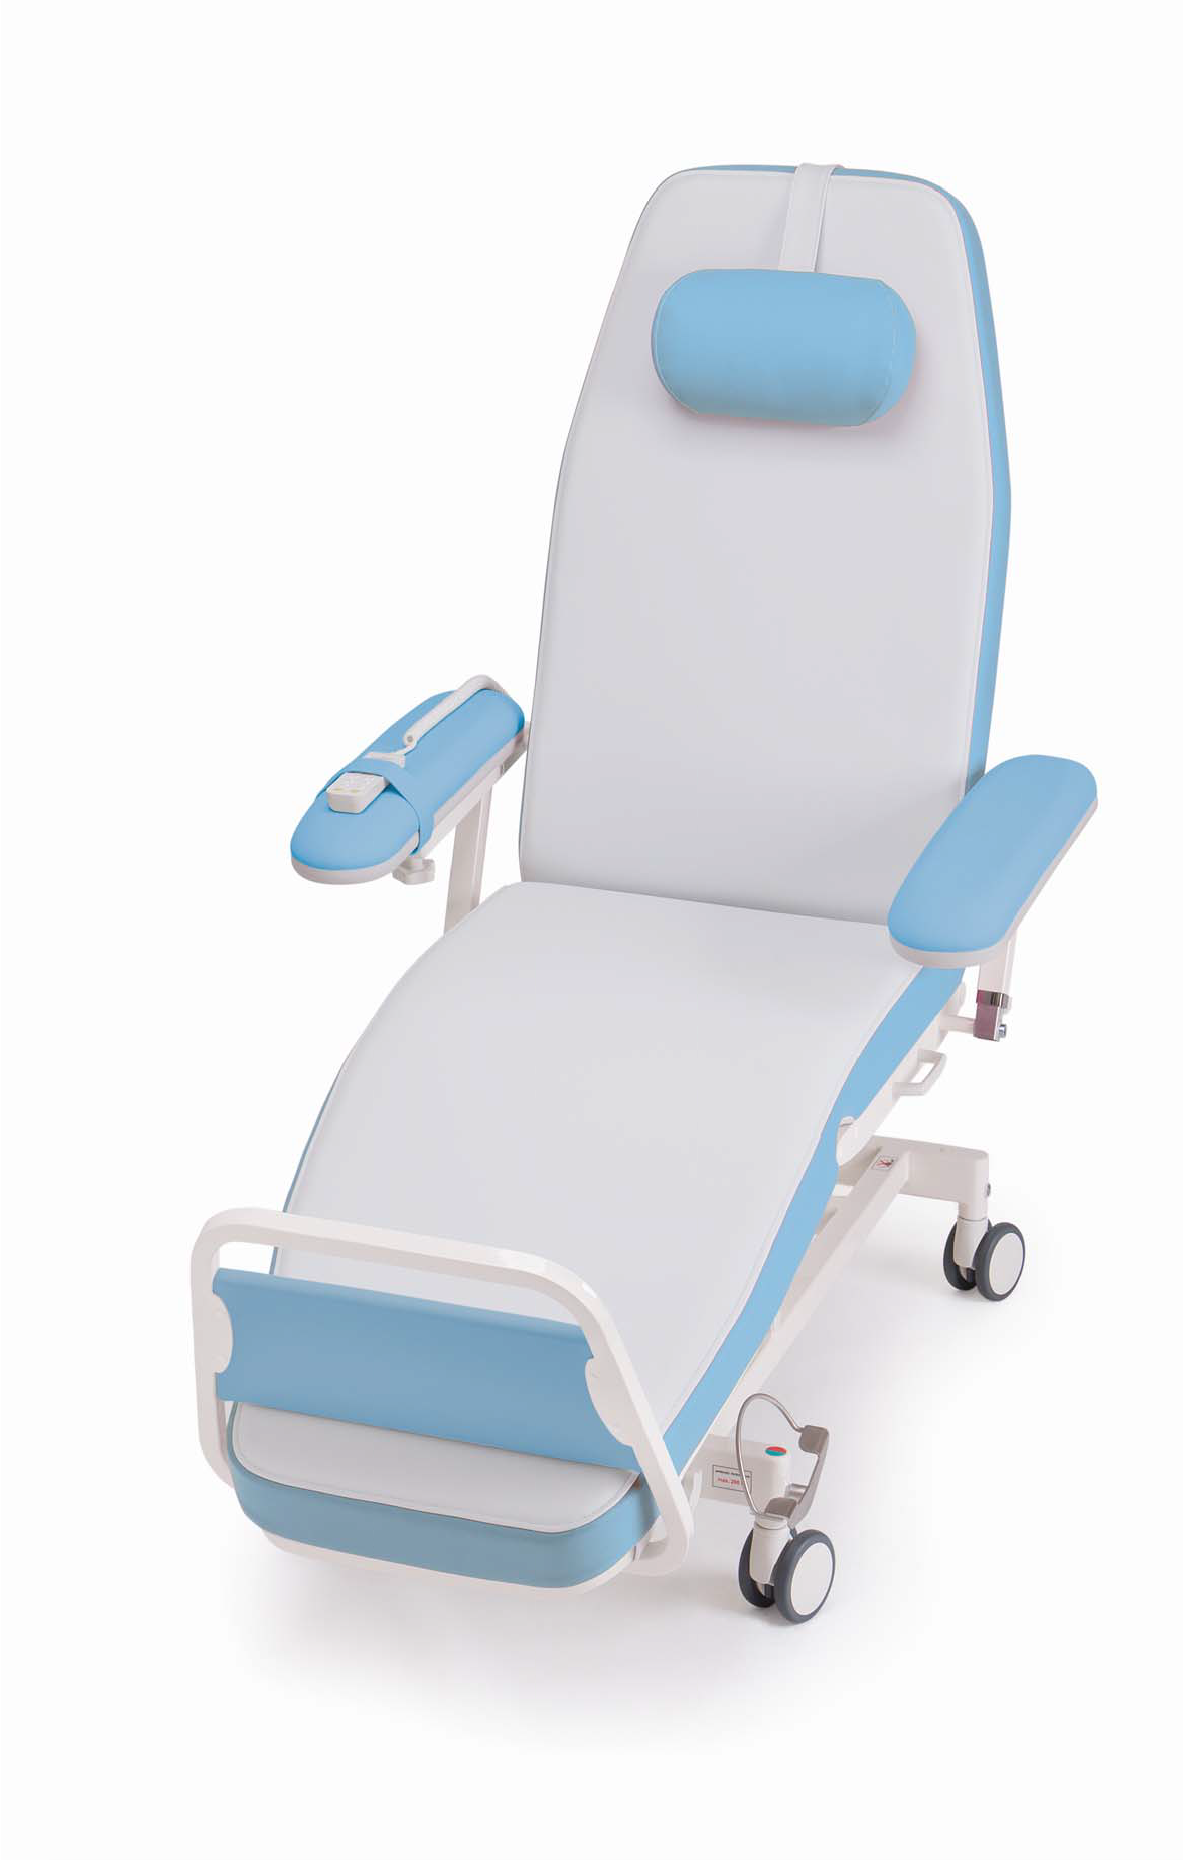 BLOOD DONATION AND THERAPY CHAIRS